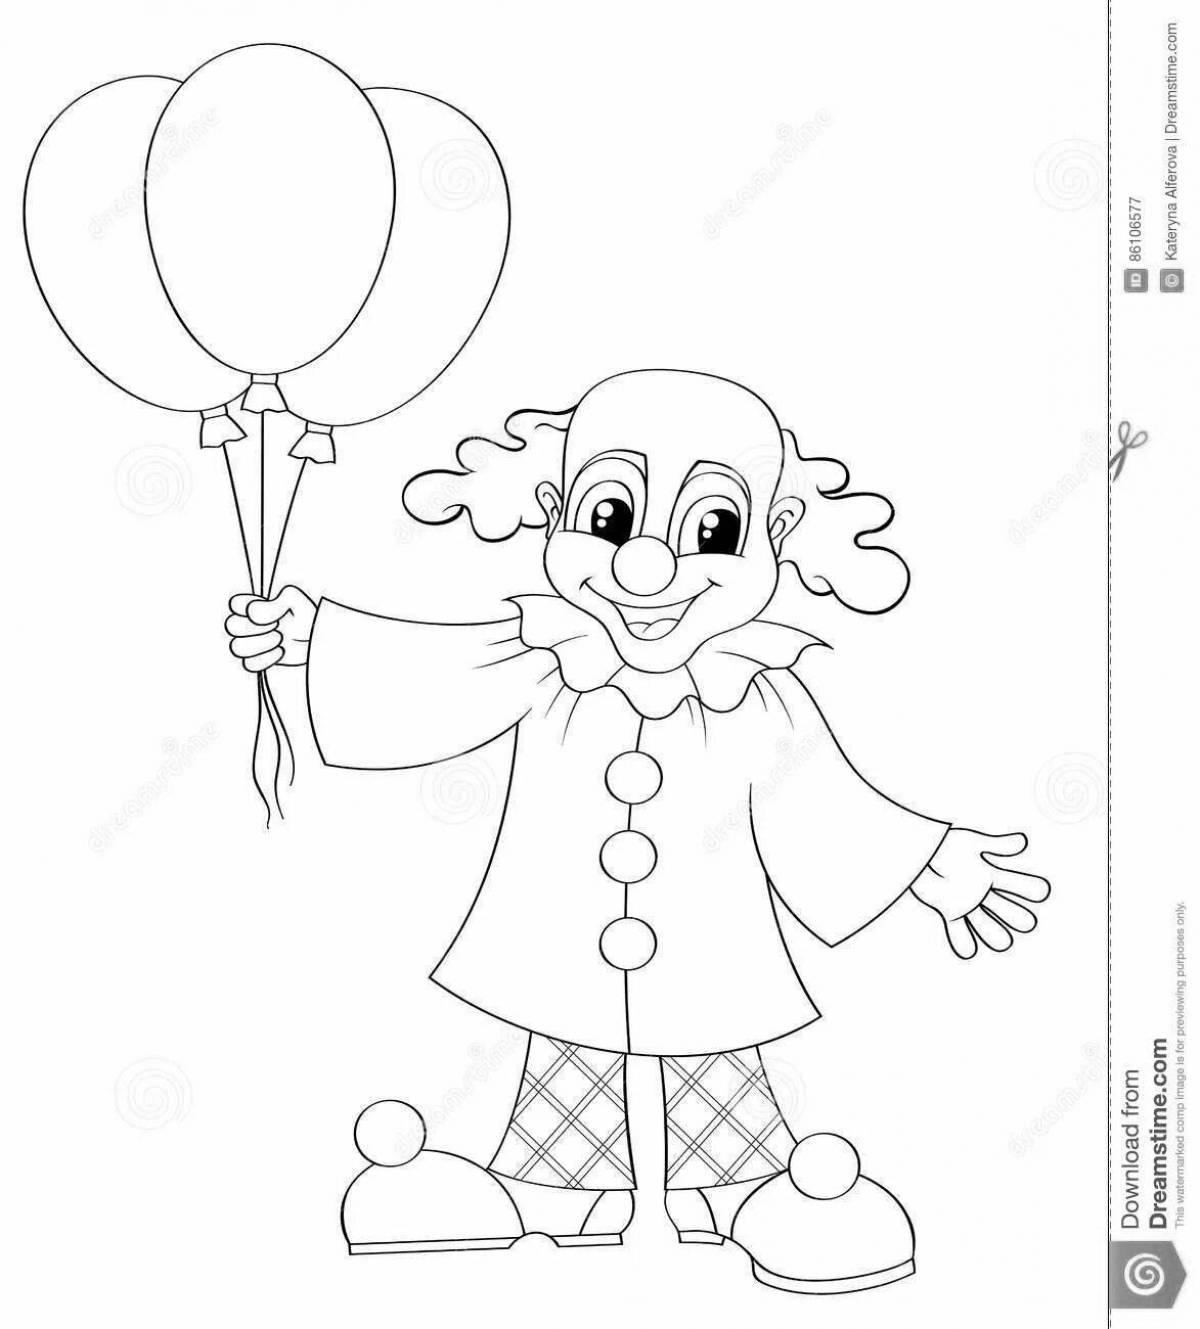 An enthusiastic clown with balloons